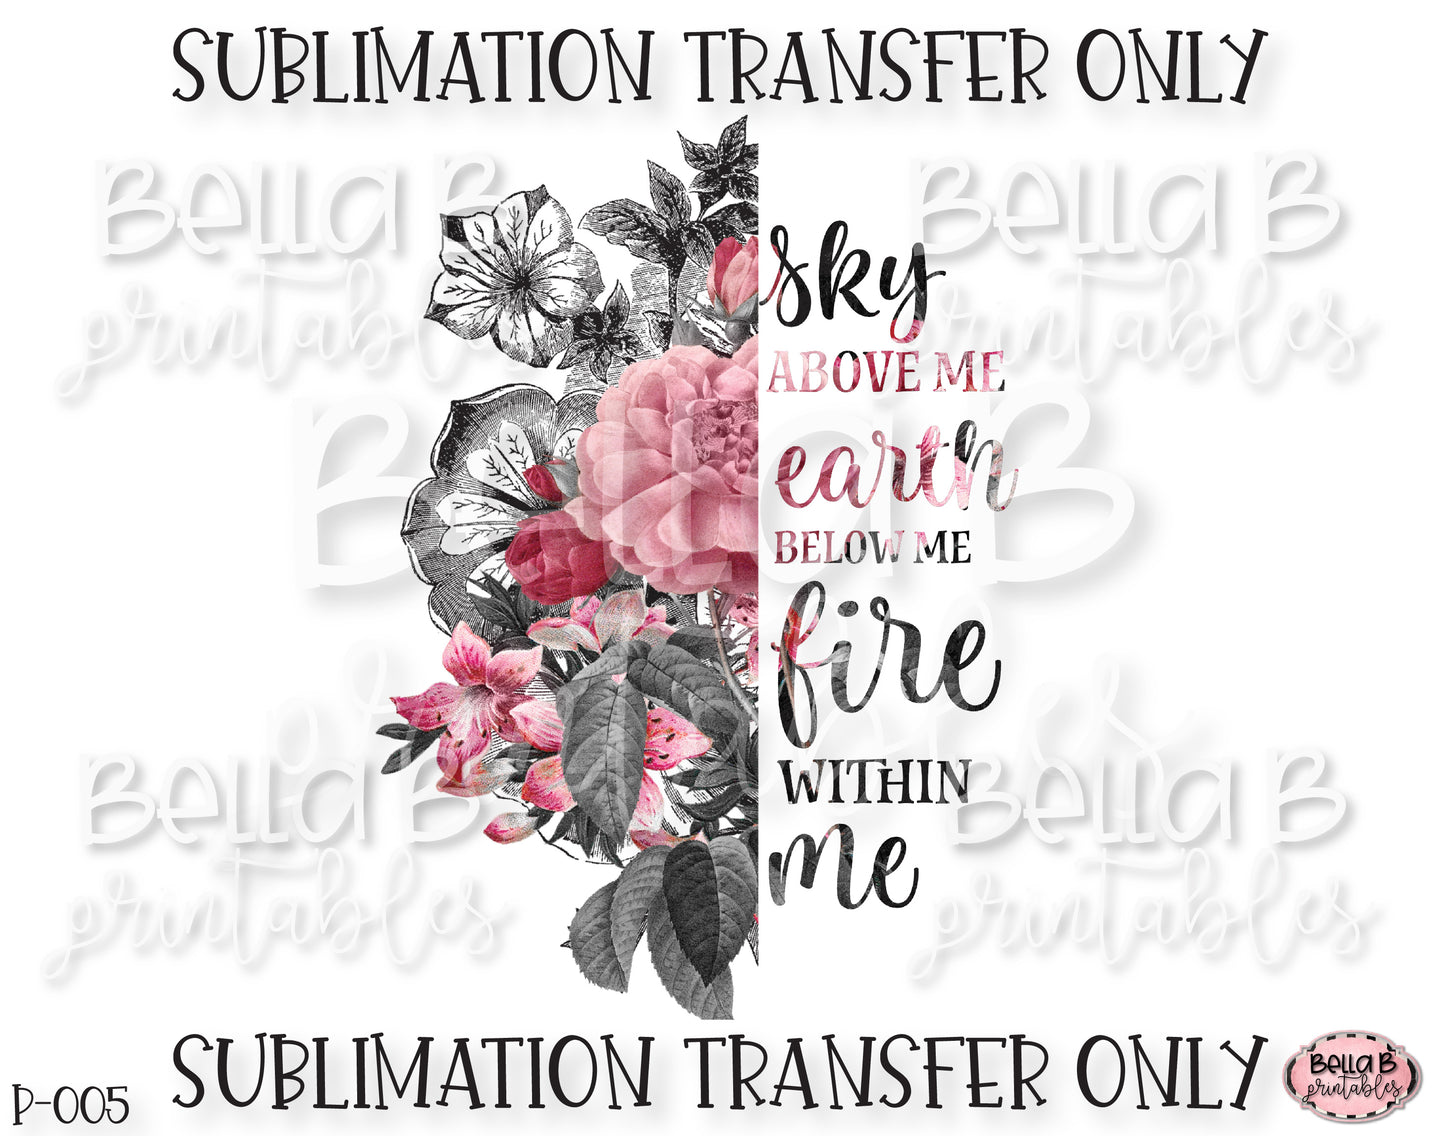 Split Flower, Sky Above Me Earth Below Me Fire Within Me Sublimation Transfer, Ready To Press, Heat Press Transfer, Sublimation Print